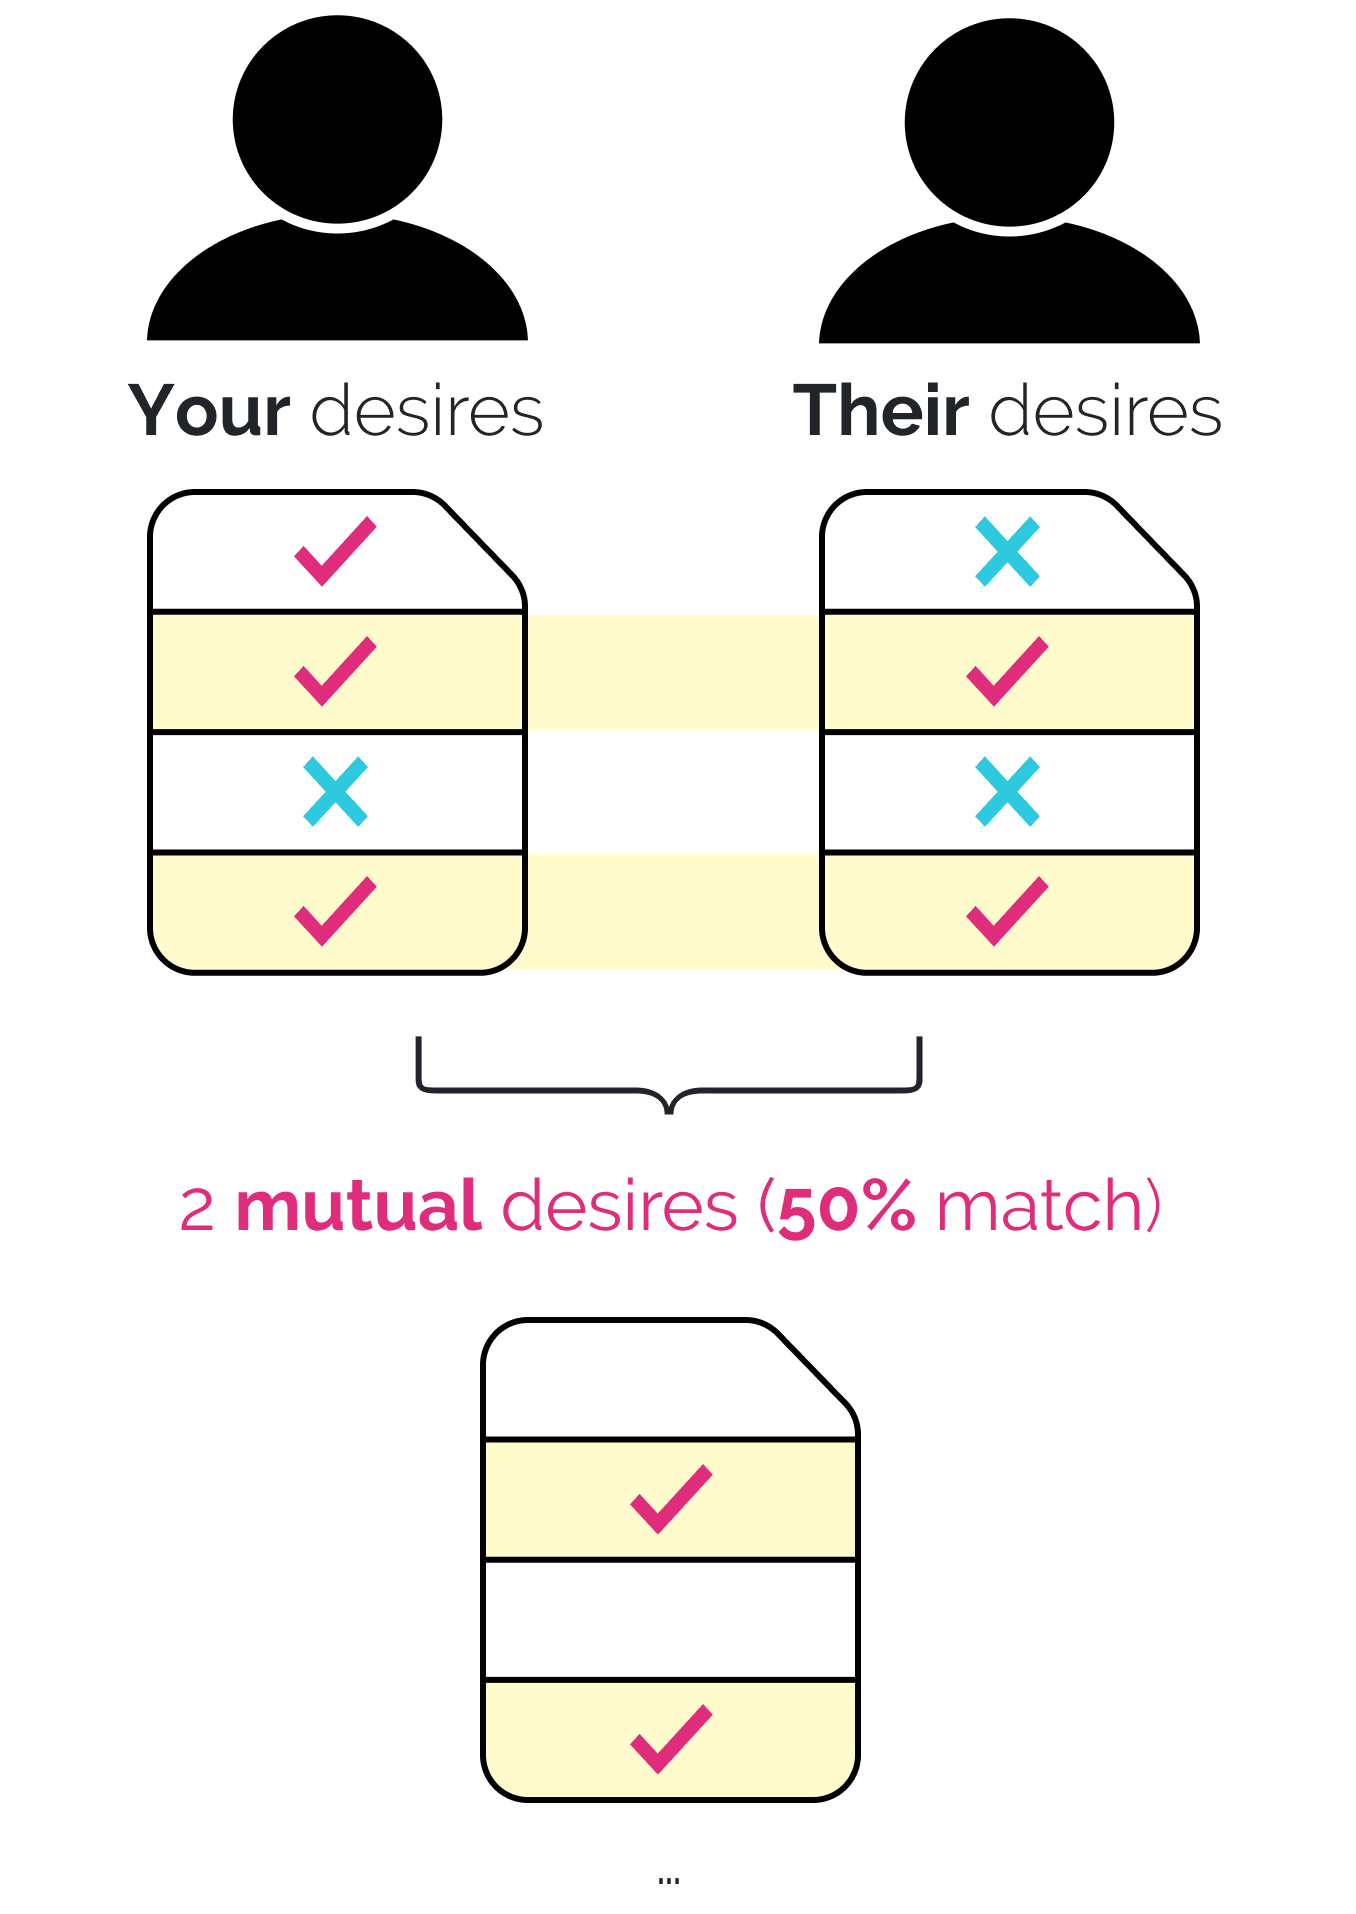 How matching works, in detail